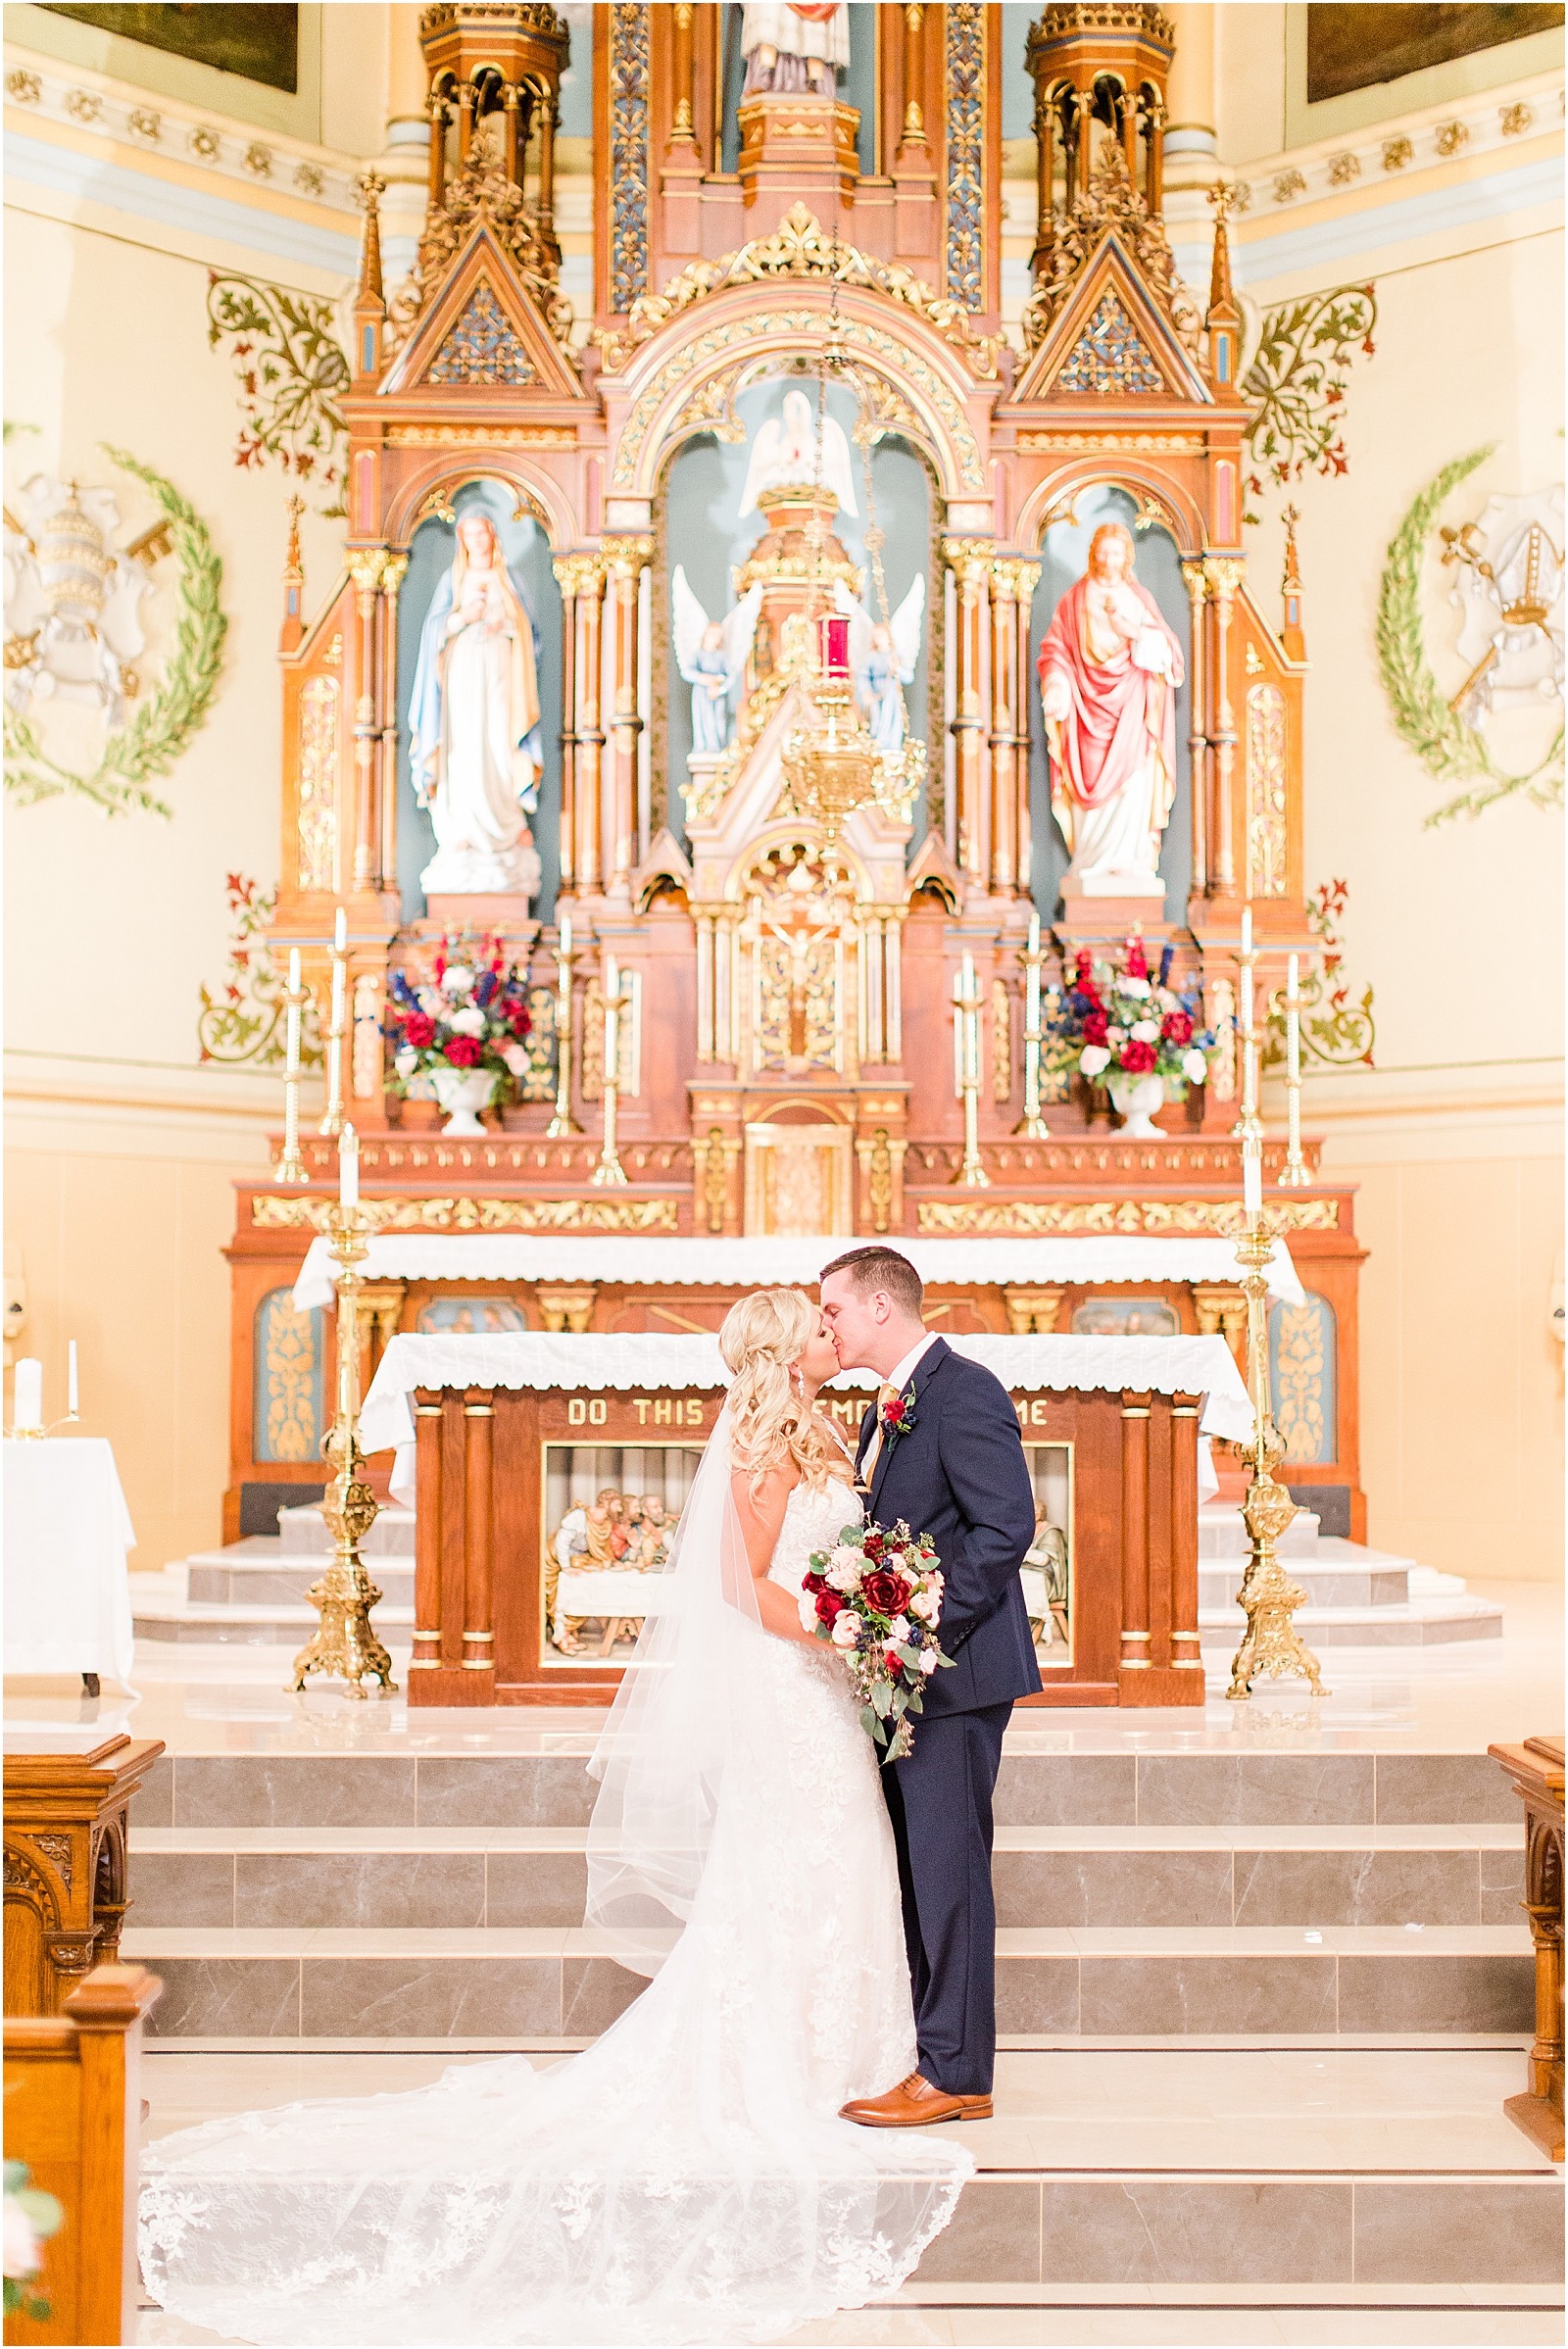 Haylee and Dillon's Evansville, Indiana wedding by Bret and Brandie Photography.0062.jpg